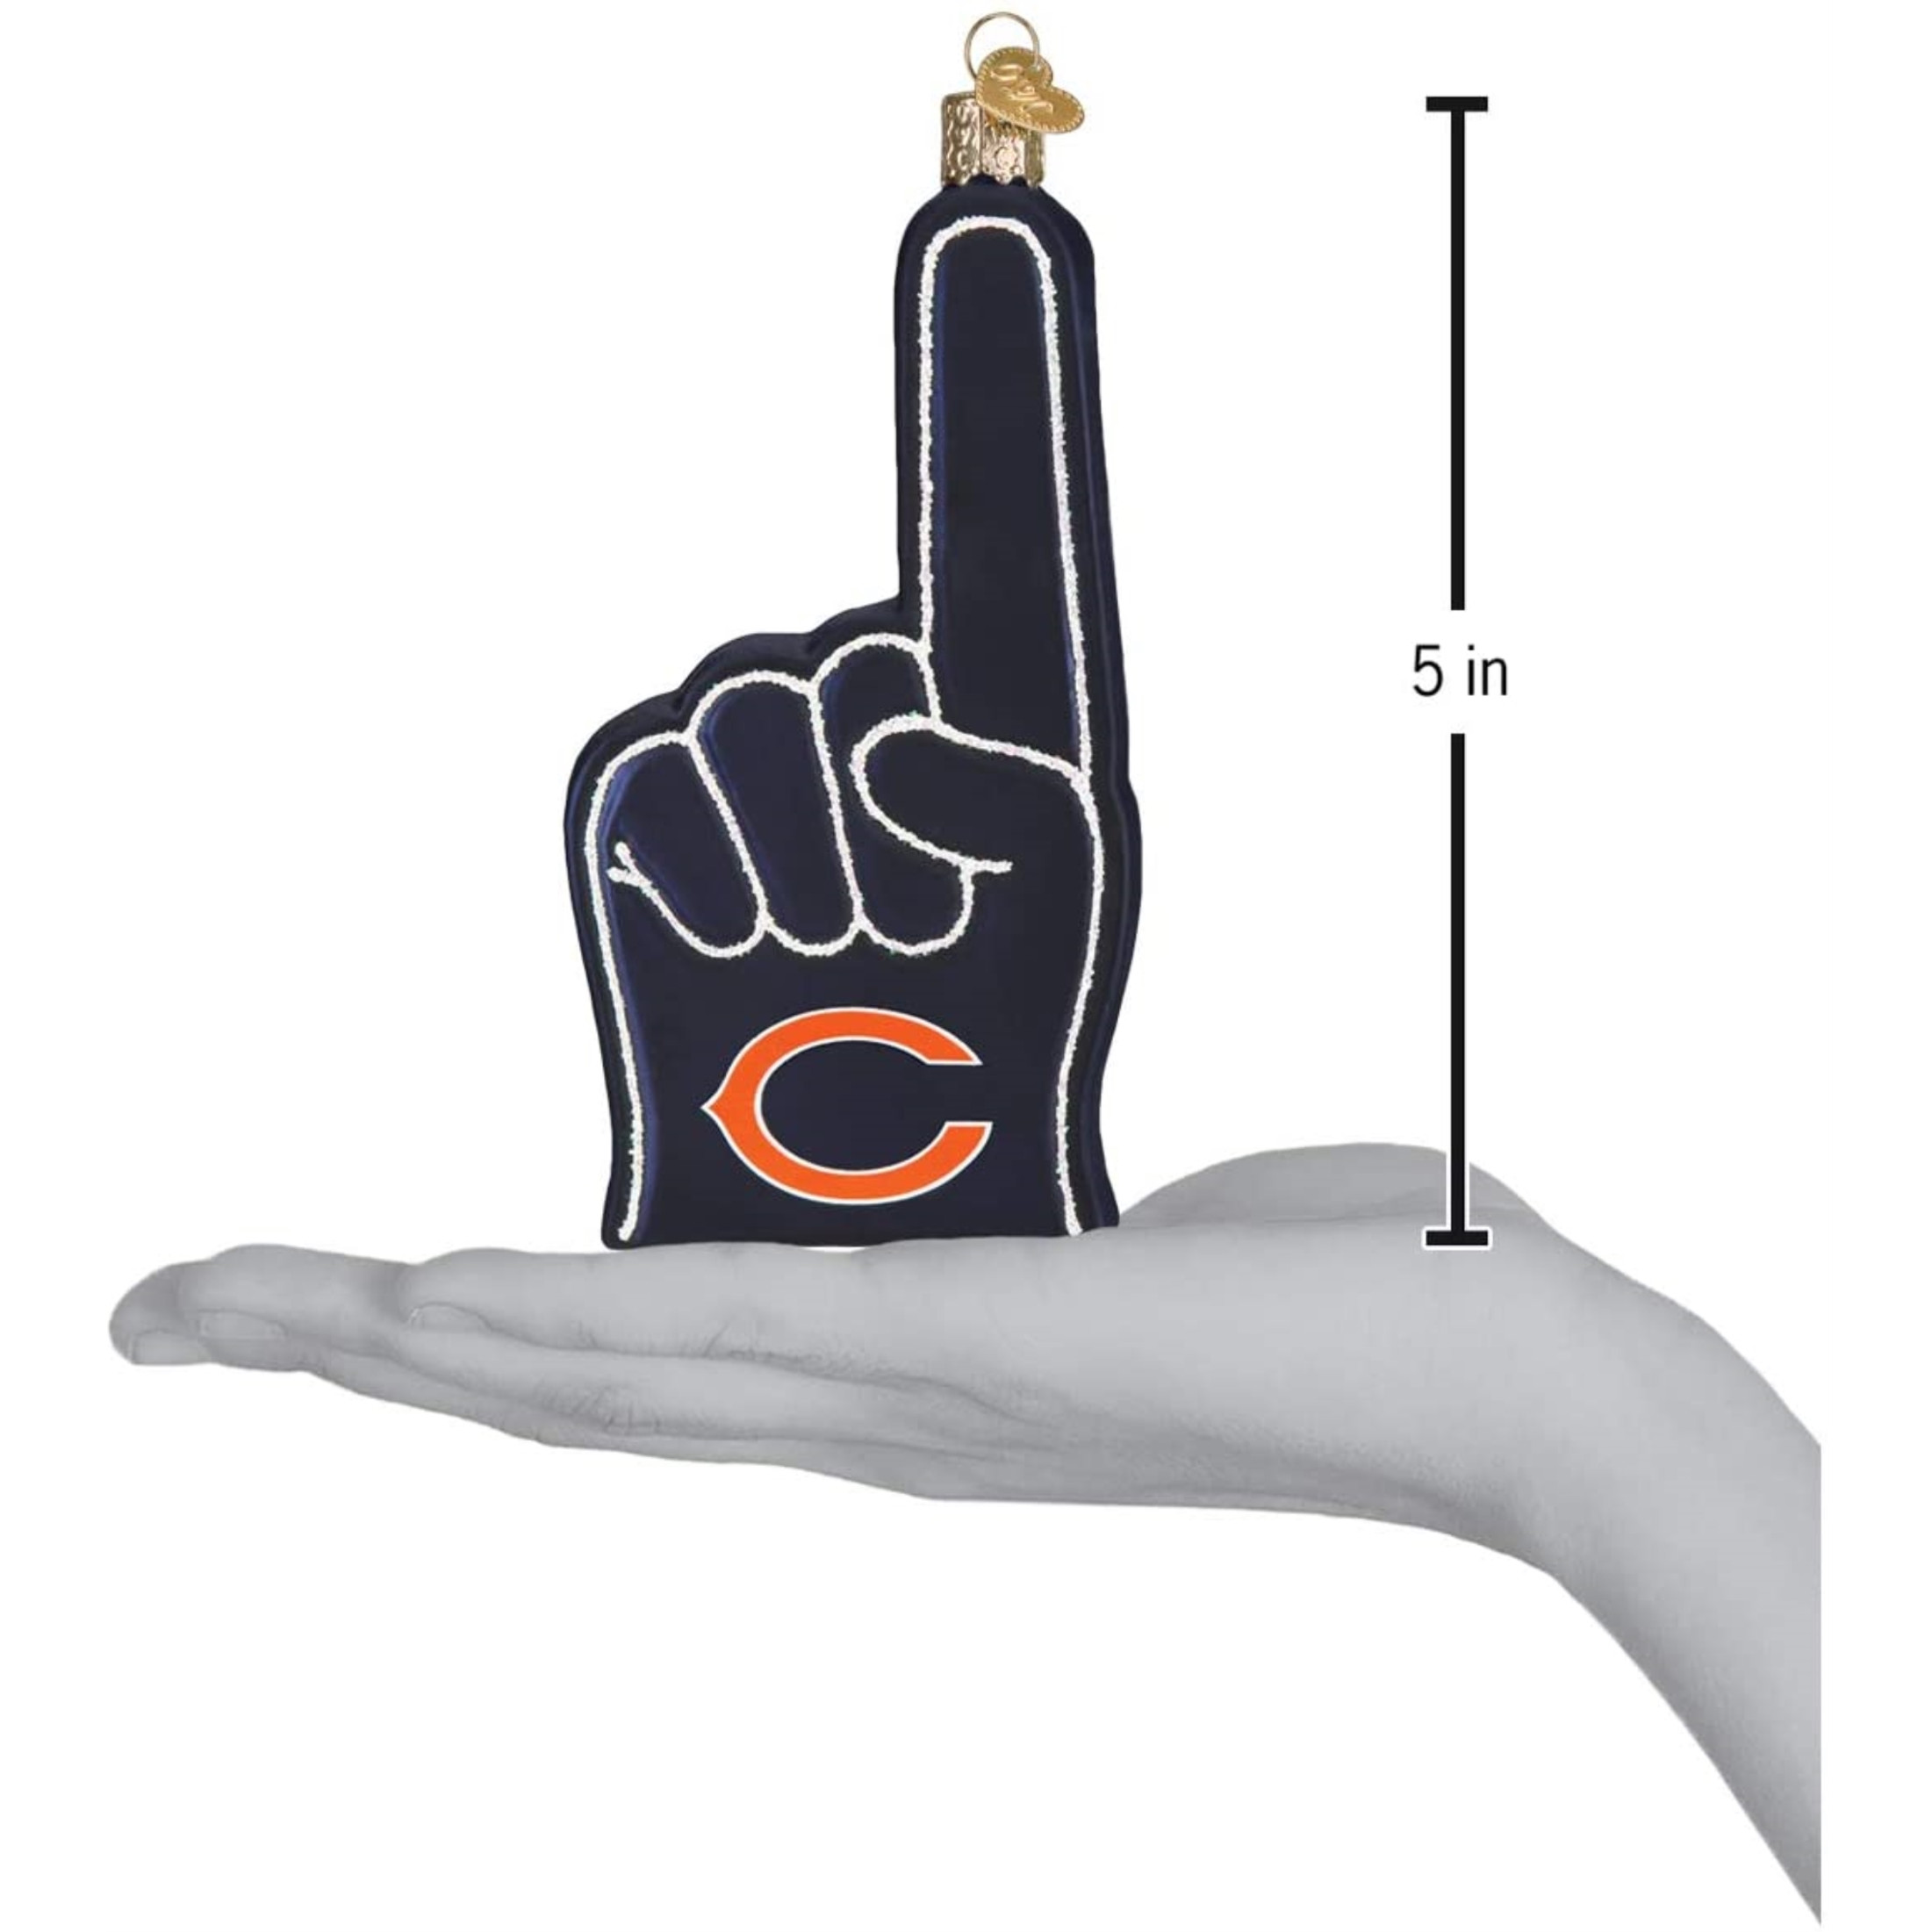 Old World Christmas Glass Blown Ornament For Christmas Tree, Chicago Bears Foam Finger (With OWC Gift Box)